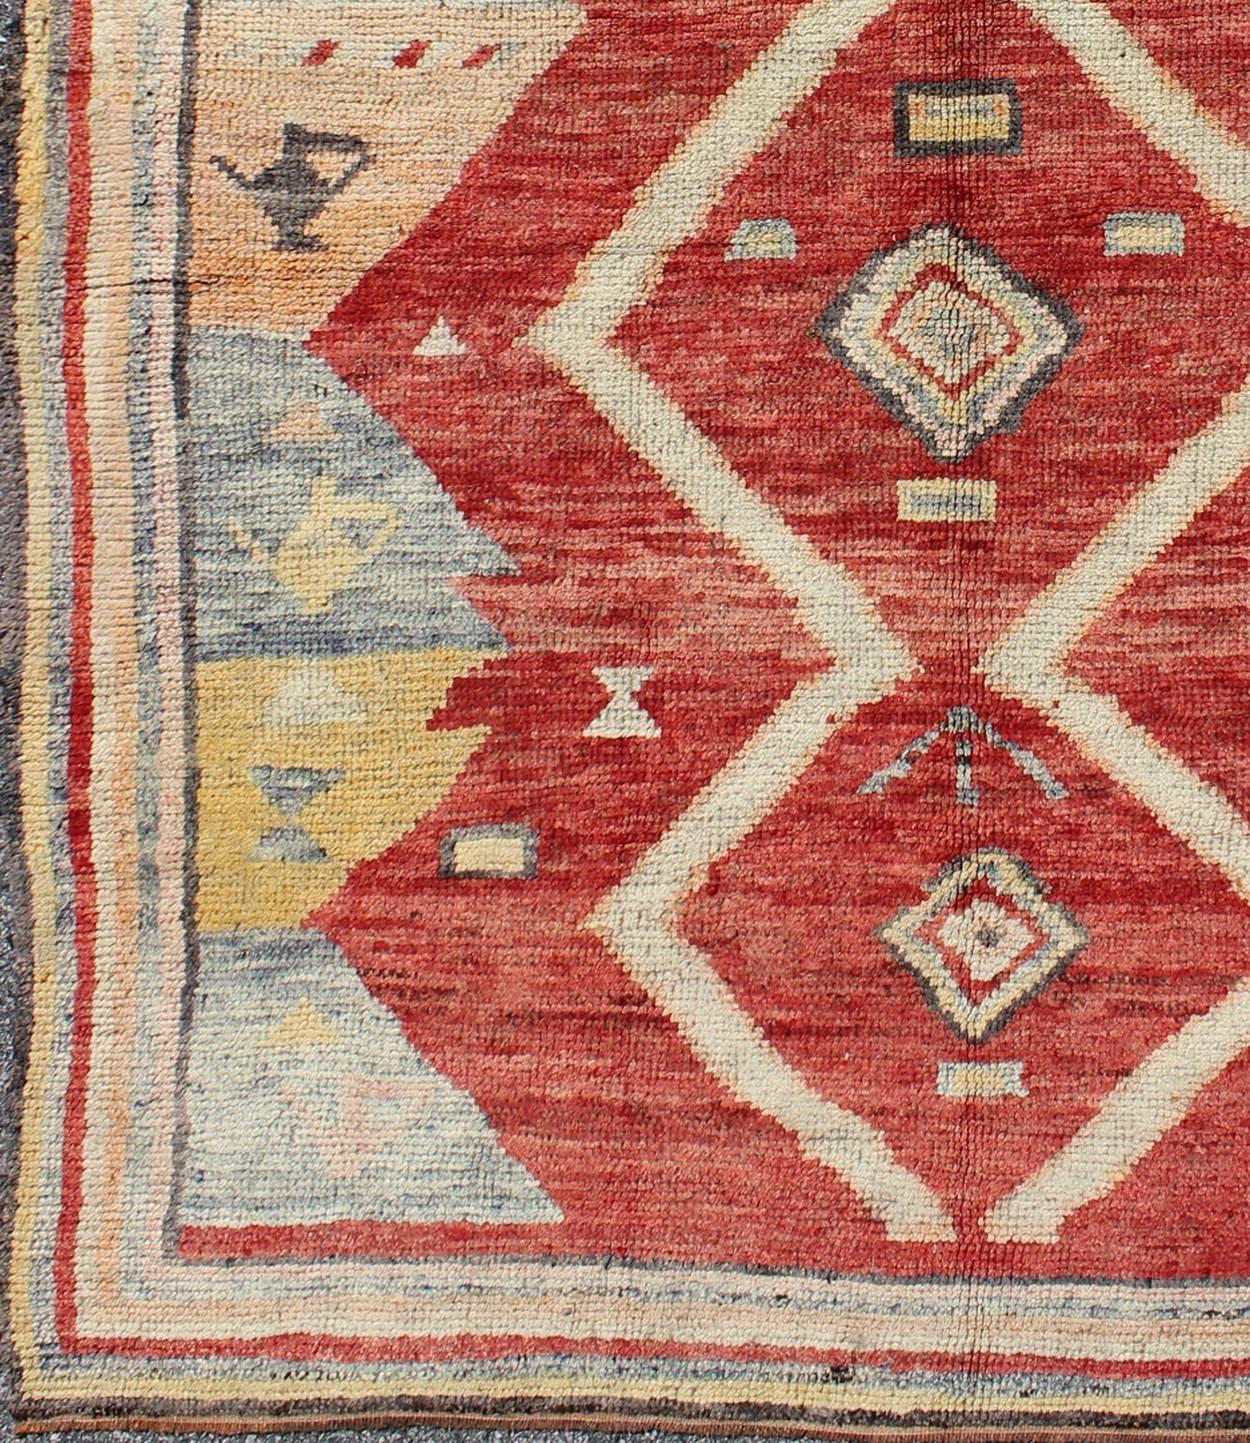 Turkish Tulu Rug with Diamond Shapes Among Geometric Motifs 
 rug/ enc-92044

This Tulu carpet contains three diamond shapes laid across a red-colored field and enclosed within surrounding geometric elements. Accent colors include yellow, orange,